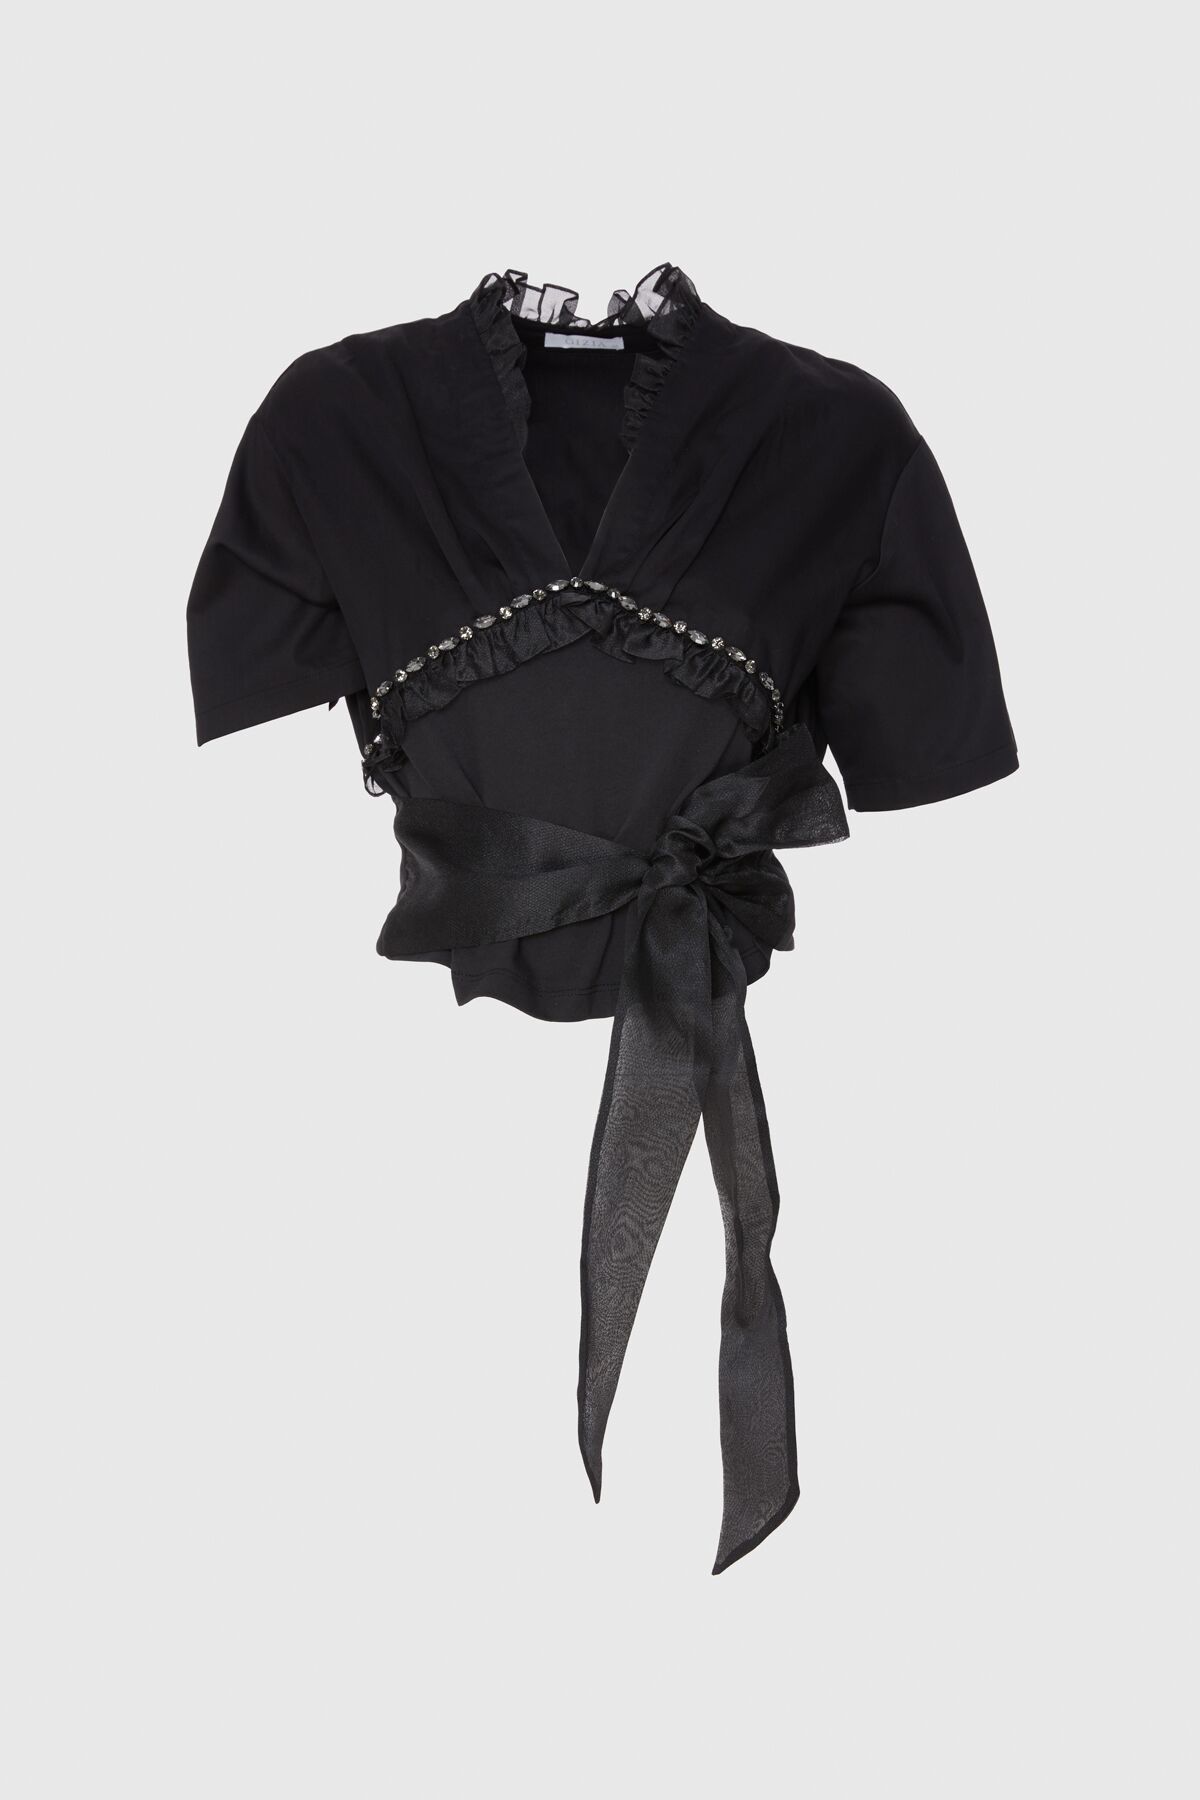  GIZIA - Stone Embroidered Detailed Organza Garnish Knitted Black Blouse